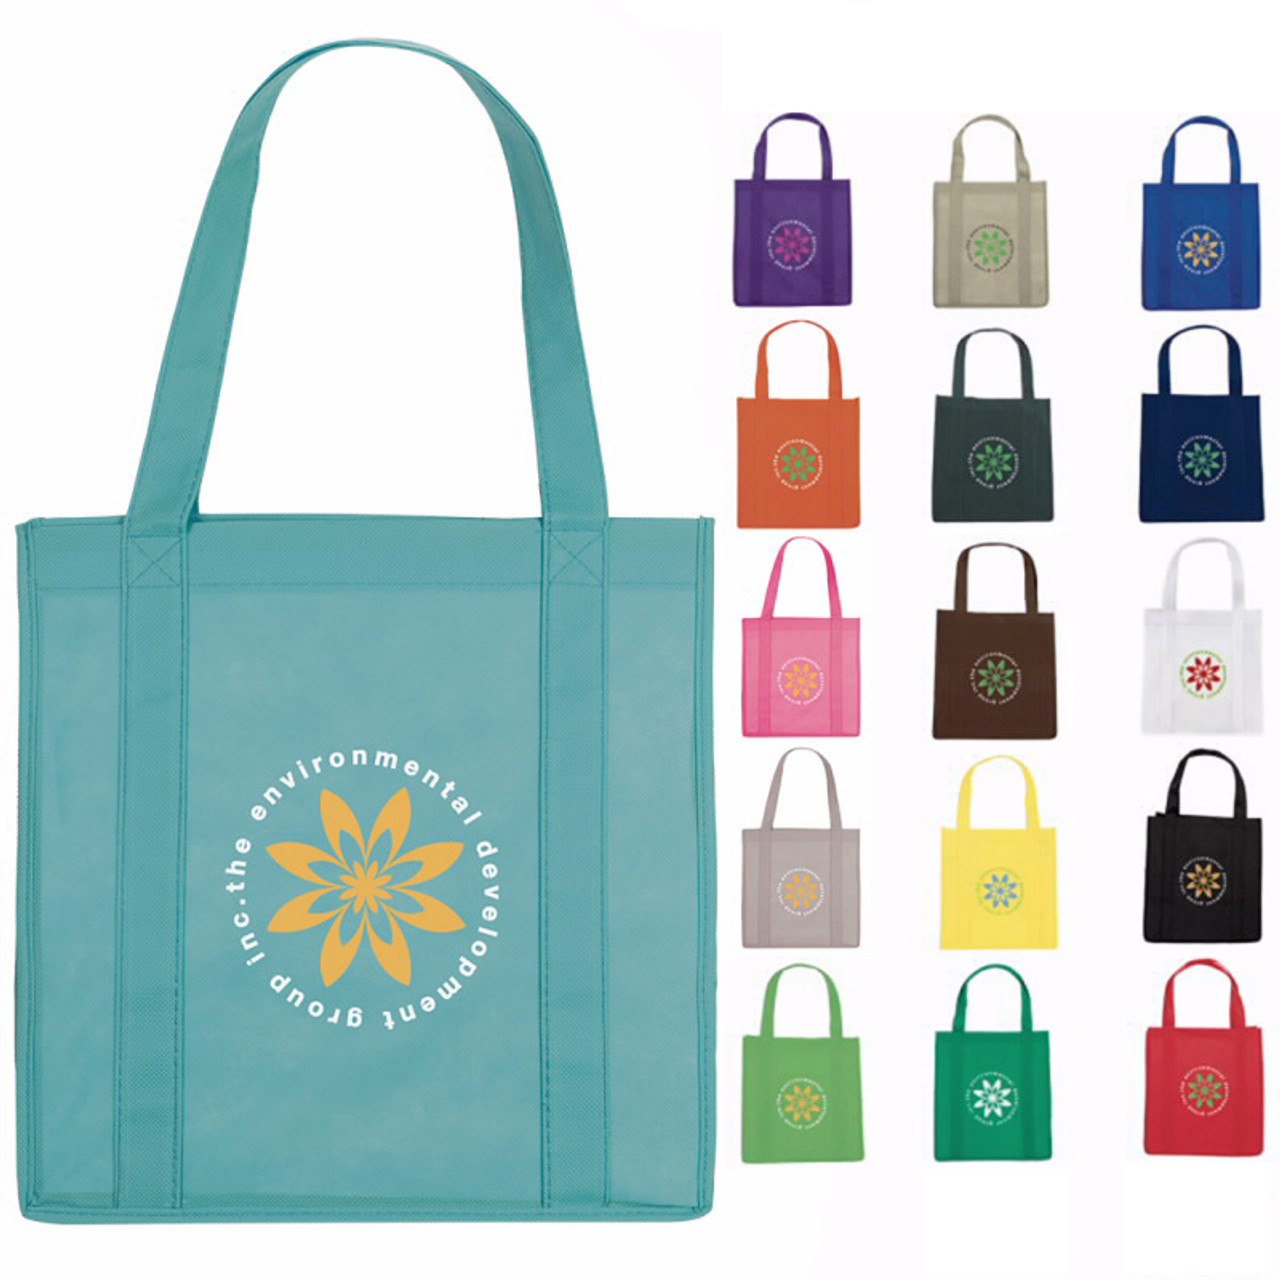 Reusable Grocery Tote Bags | Promotional Shopping Bags - Paws 2 Purrfection  Promotions